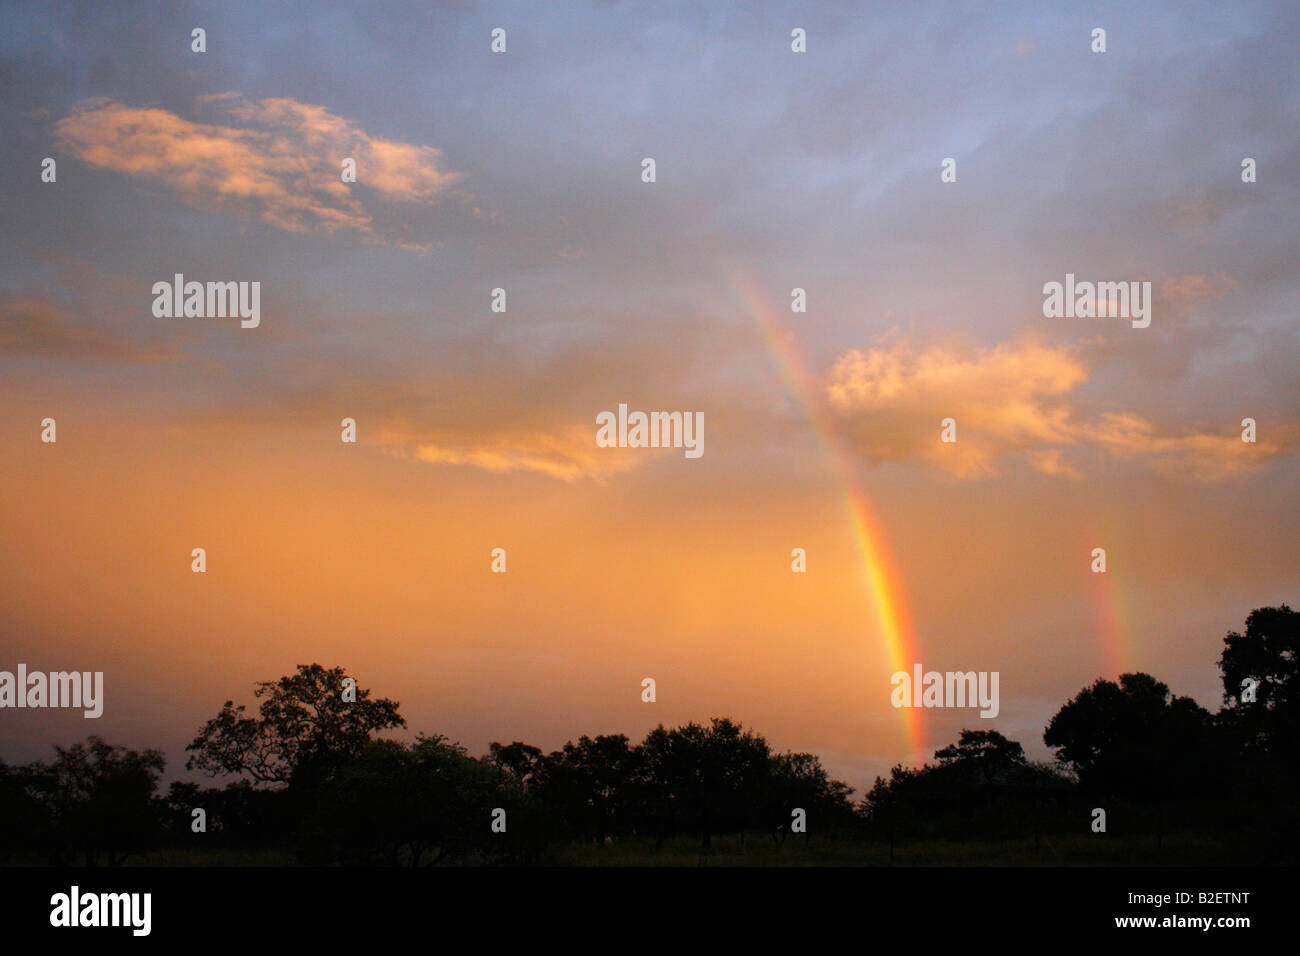 Tree canopies silhouetted against a rainbow Stock Photo